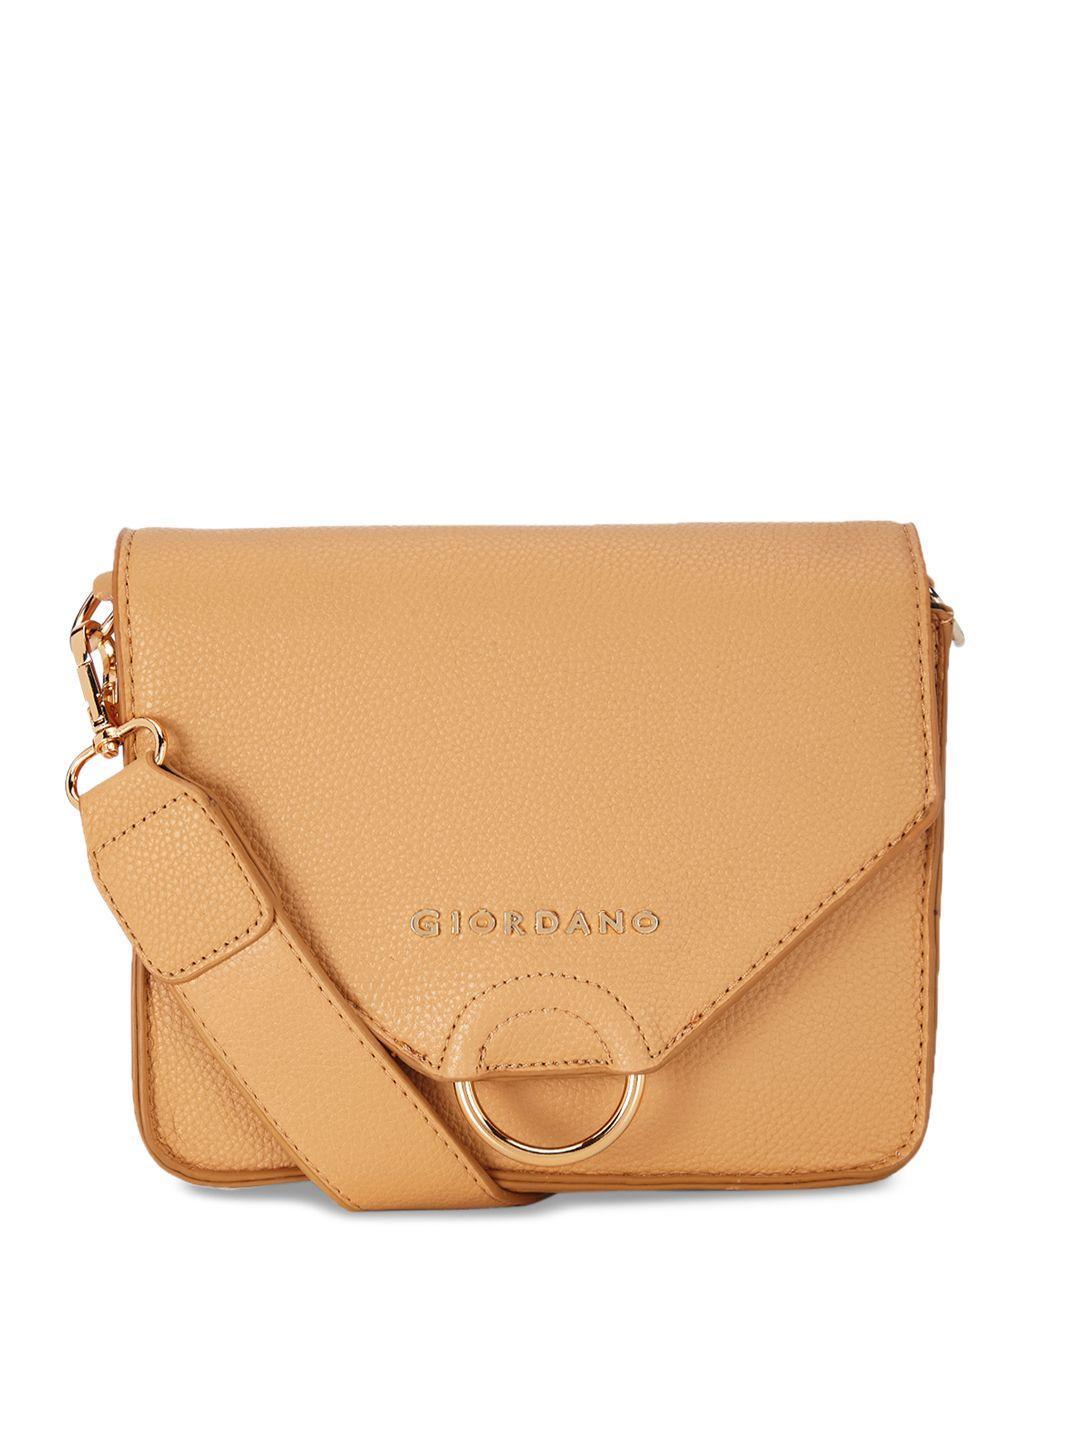 giordano brown solid sling bag